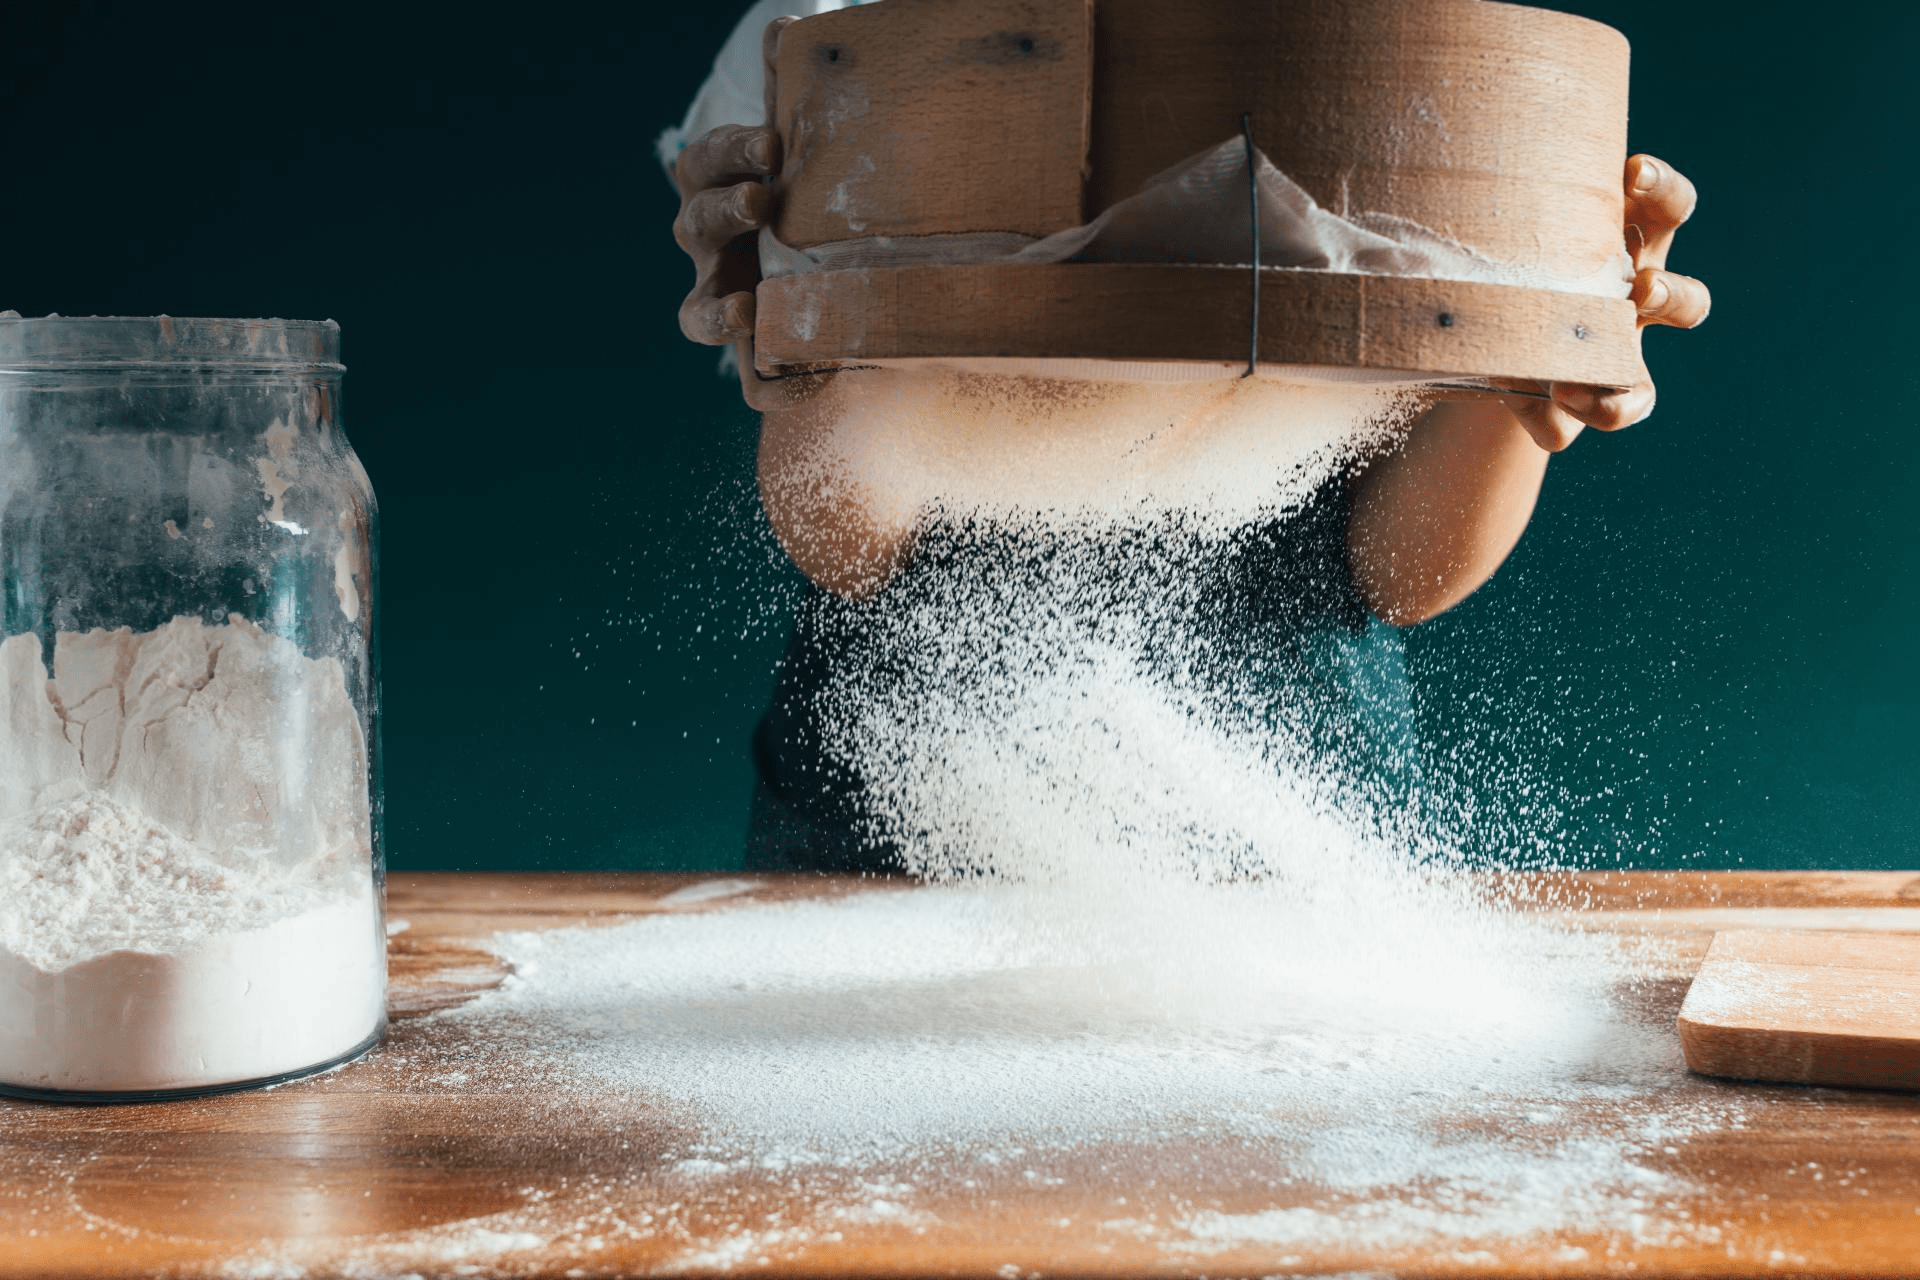 Best 00 flour: Everything You Need to Know